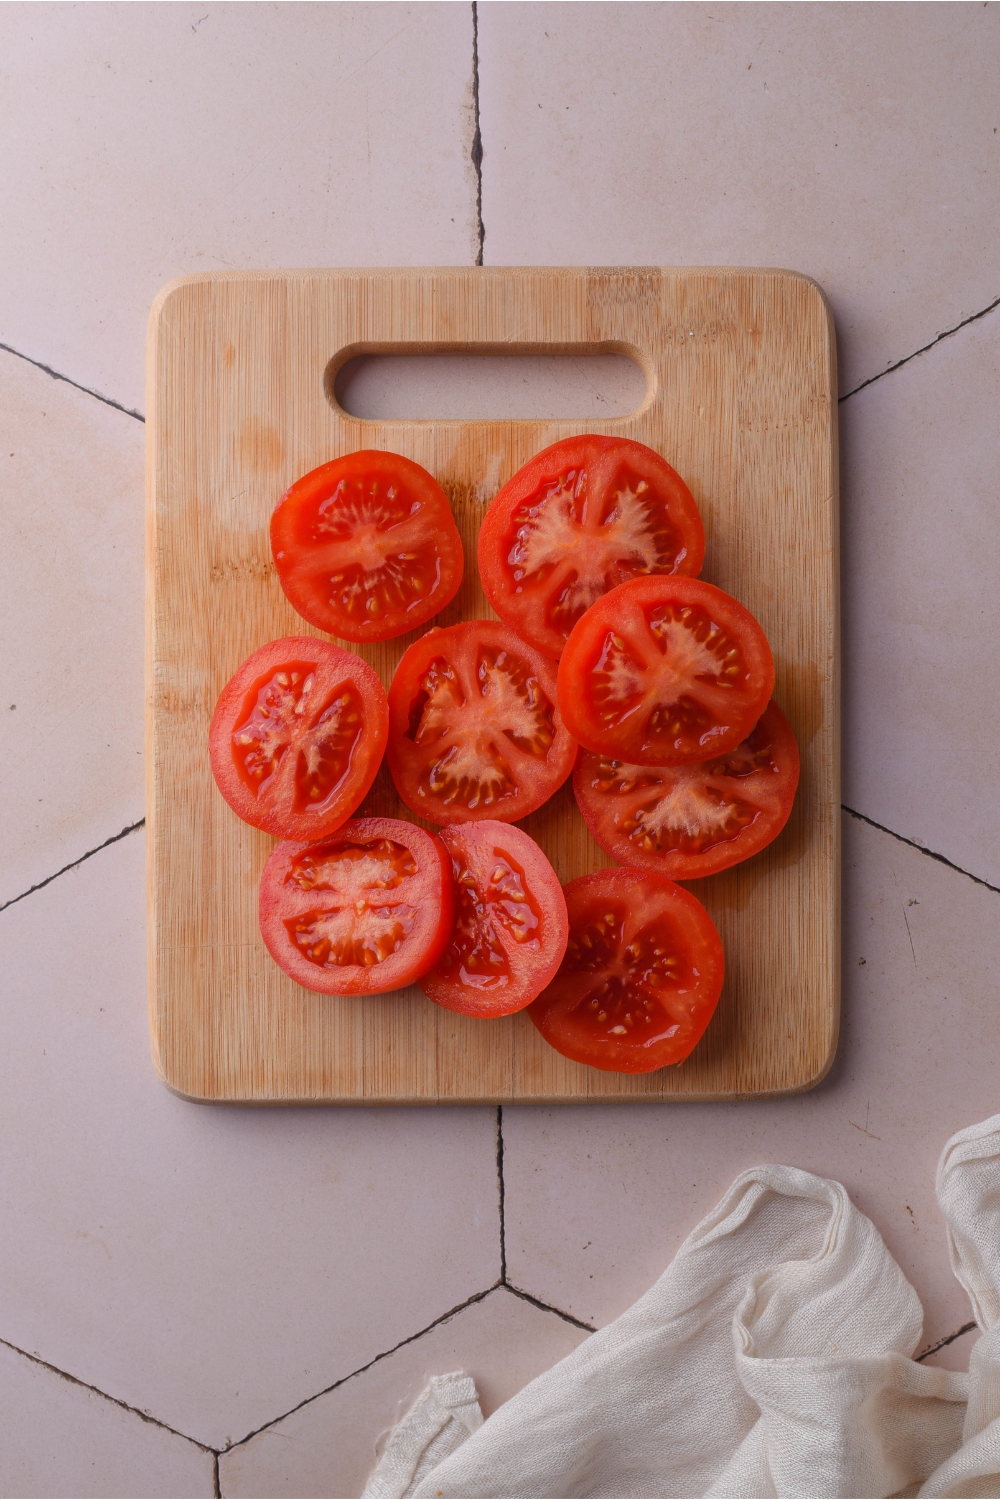 Overhead view of a pile of tomato slices on a wooden cutting board.